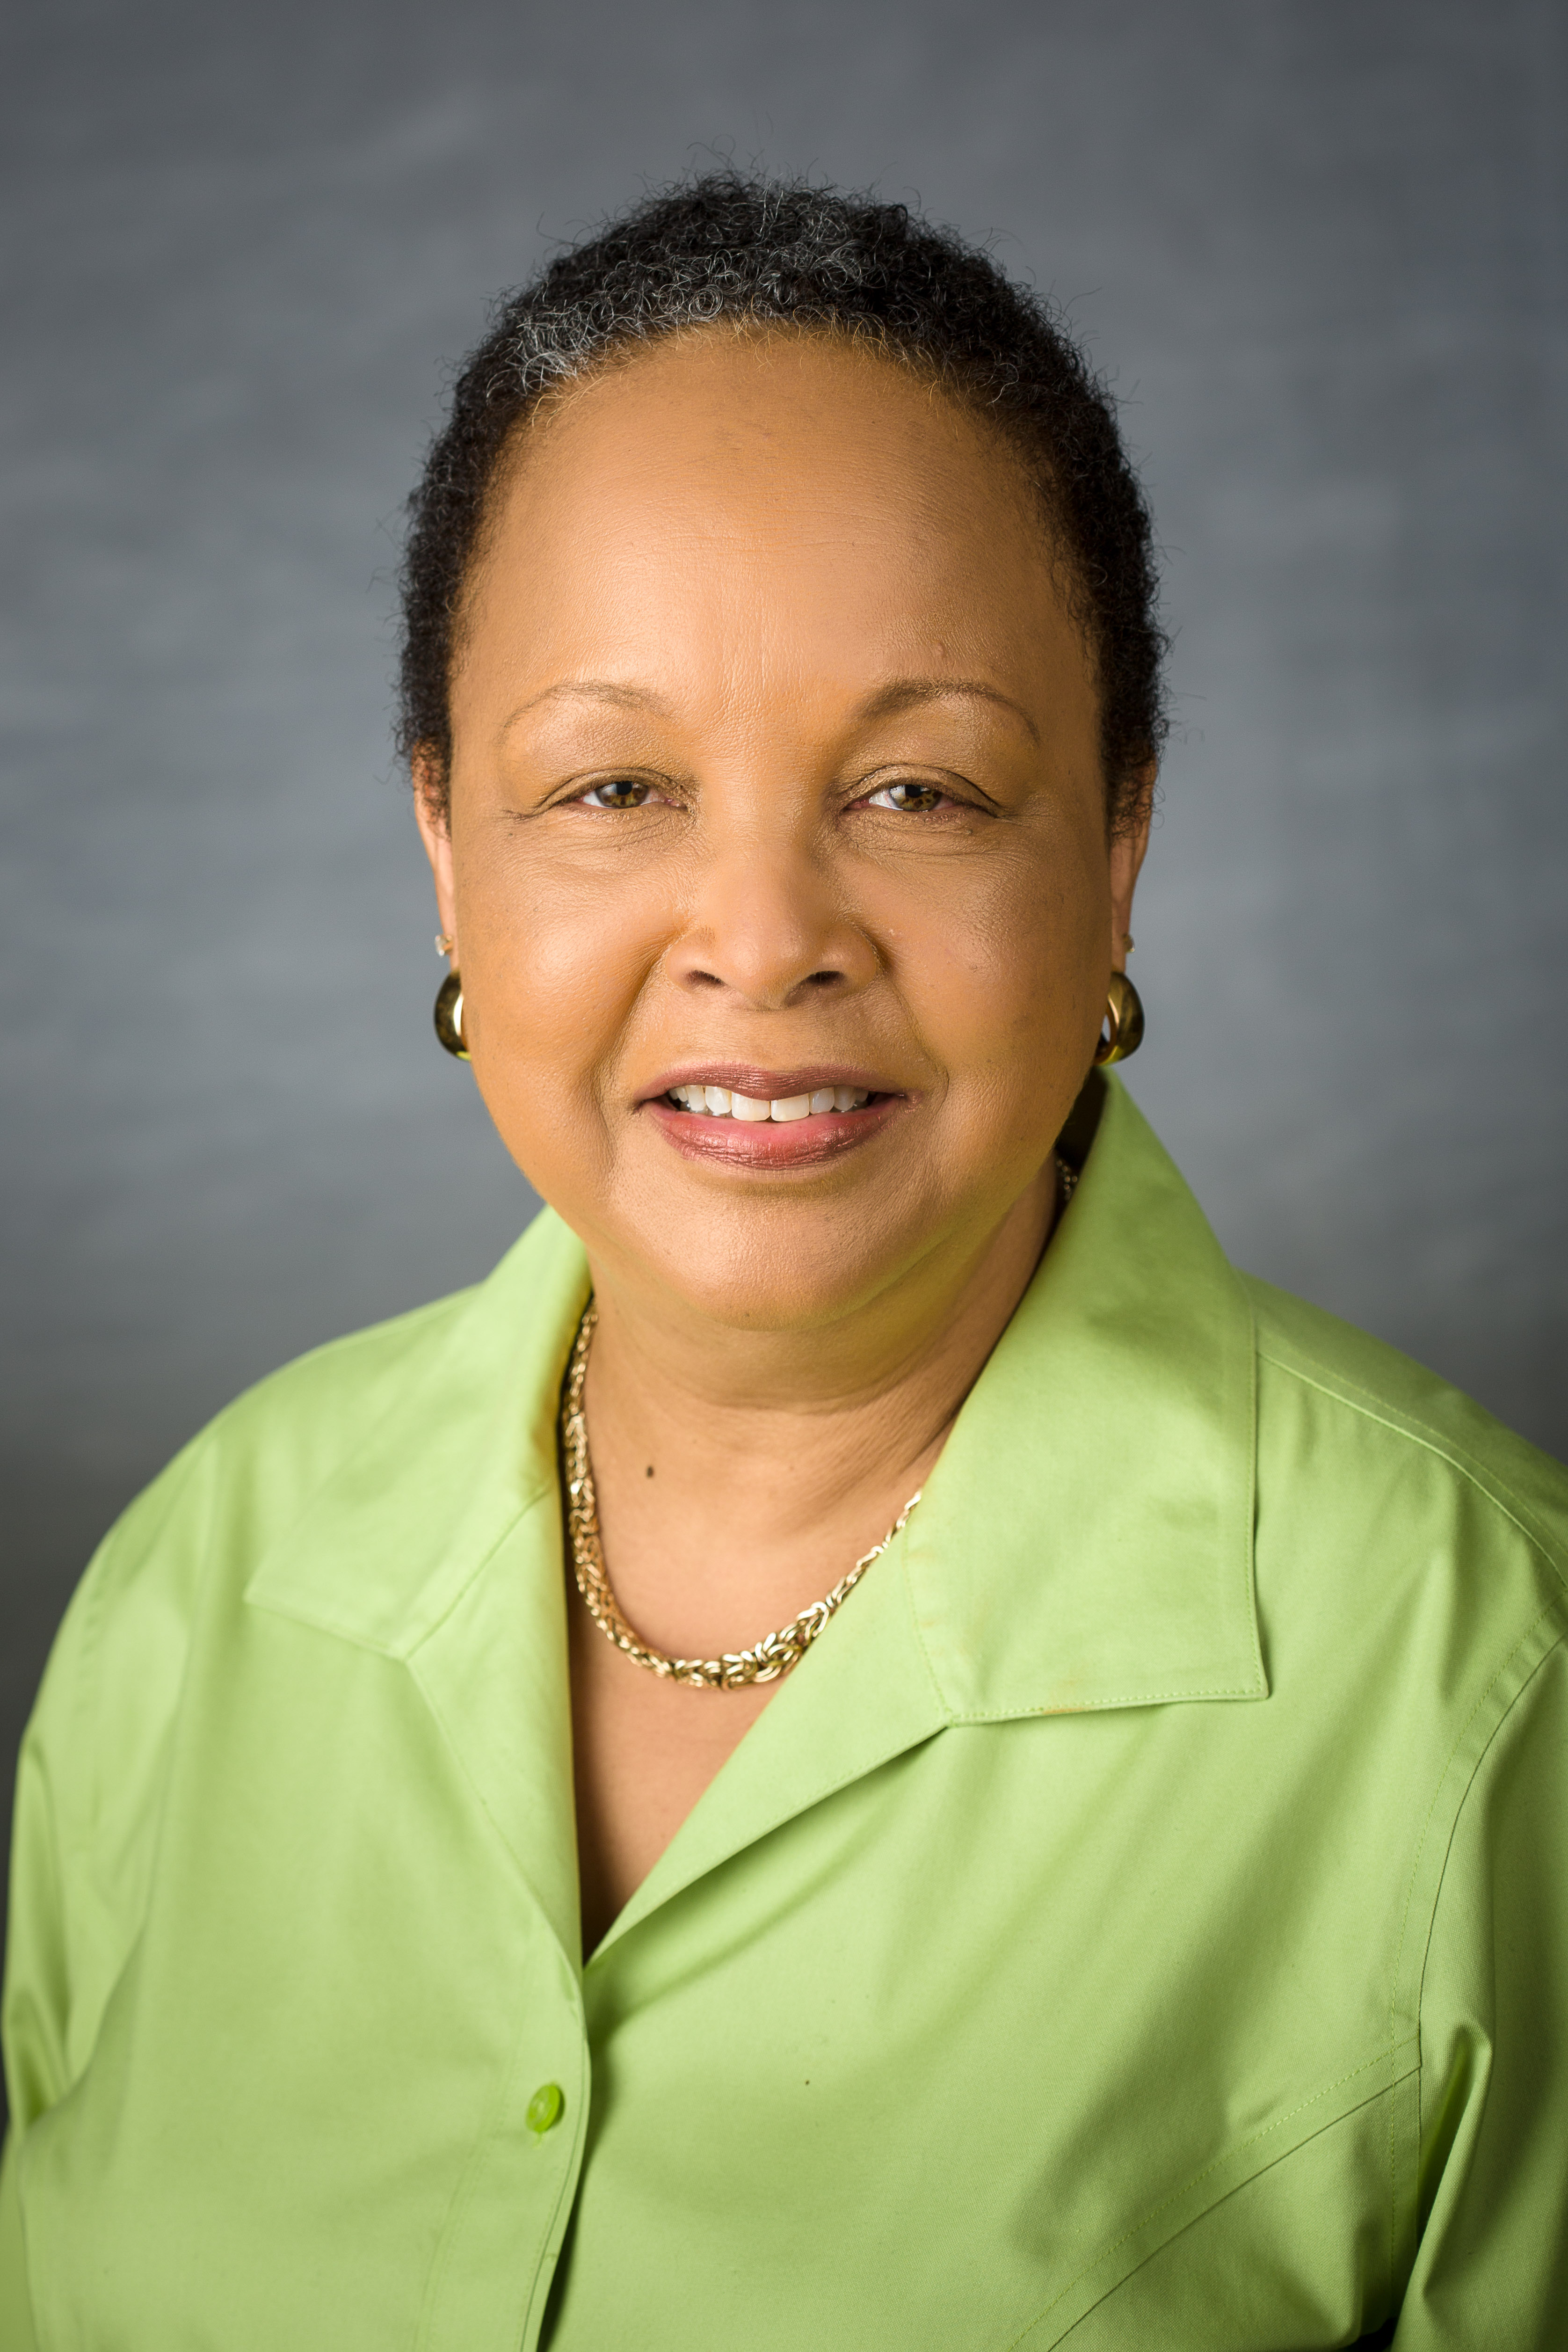 Headshot of Dr. Vanessa Jackson in a green button-up shirt